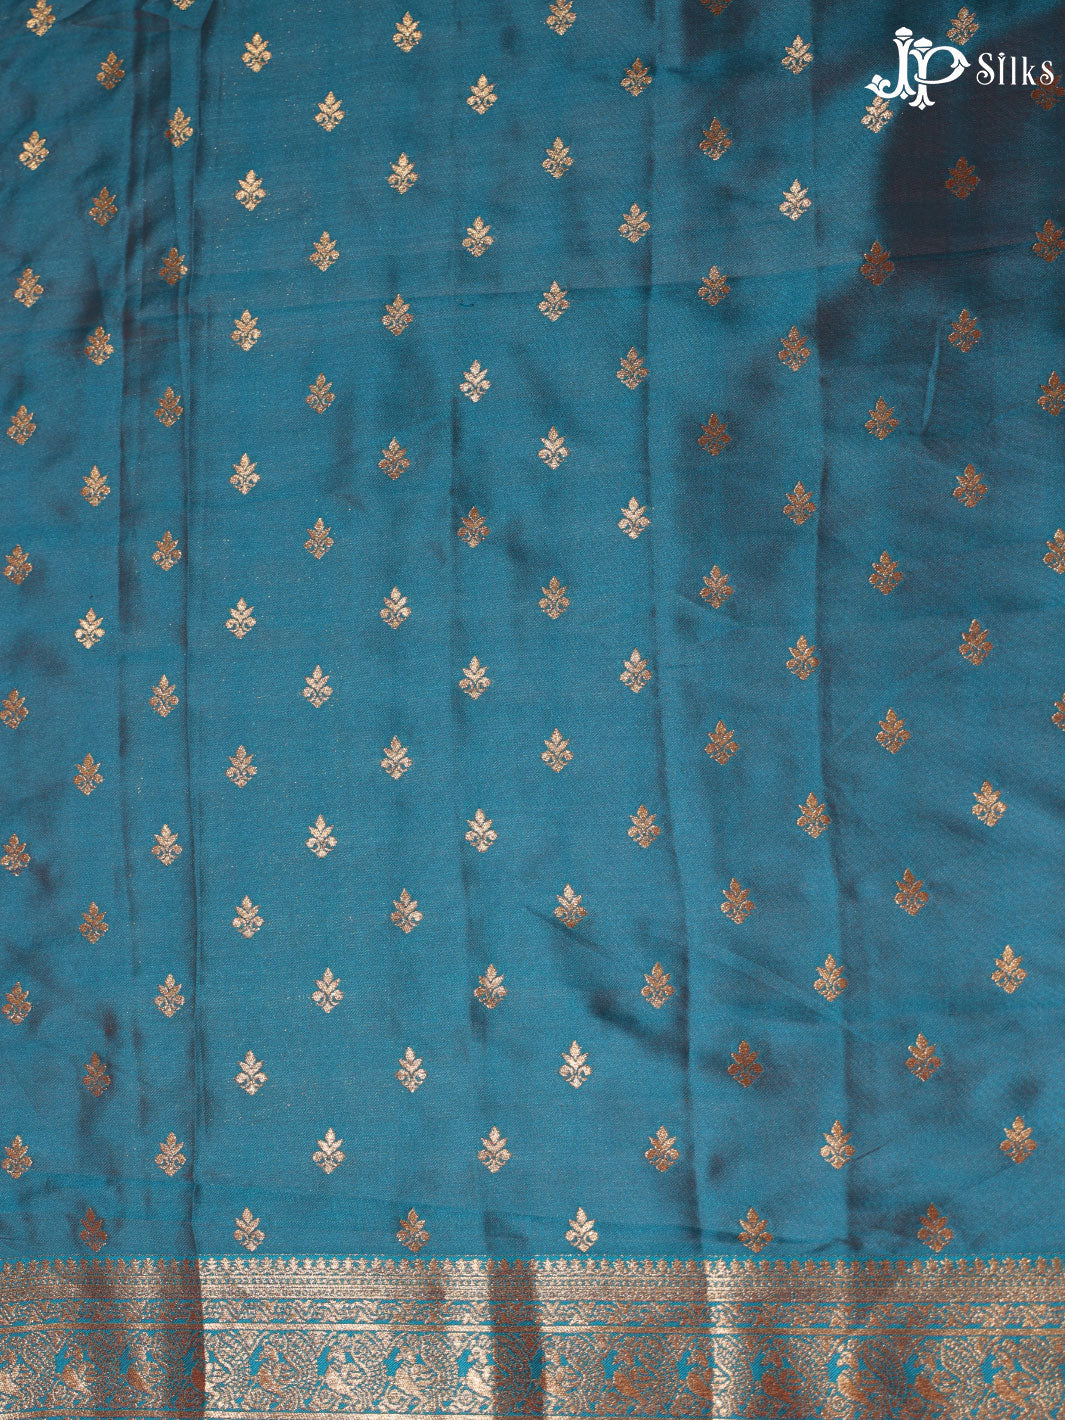 Mustard Yellow and Teal Blue Semi banaras with Digital Prints Fancy Sarees - E4001 - View 2